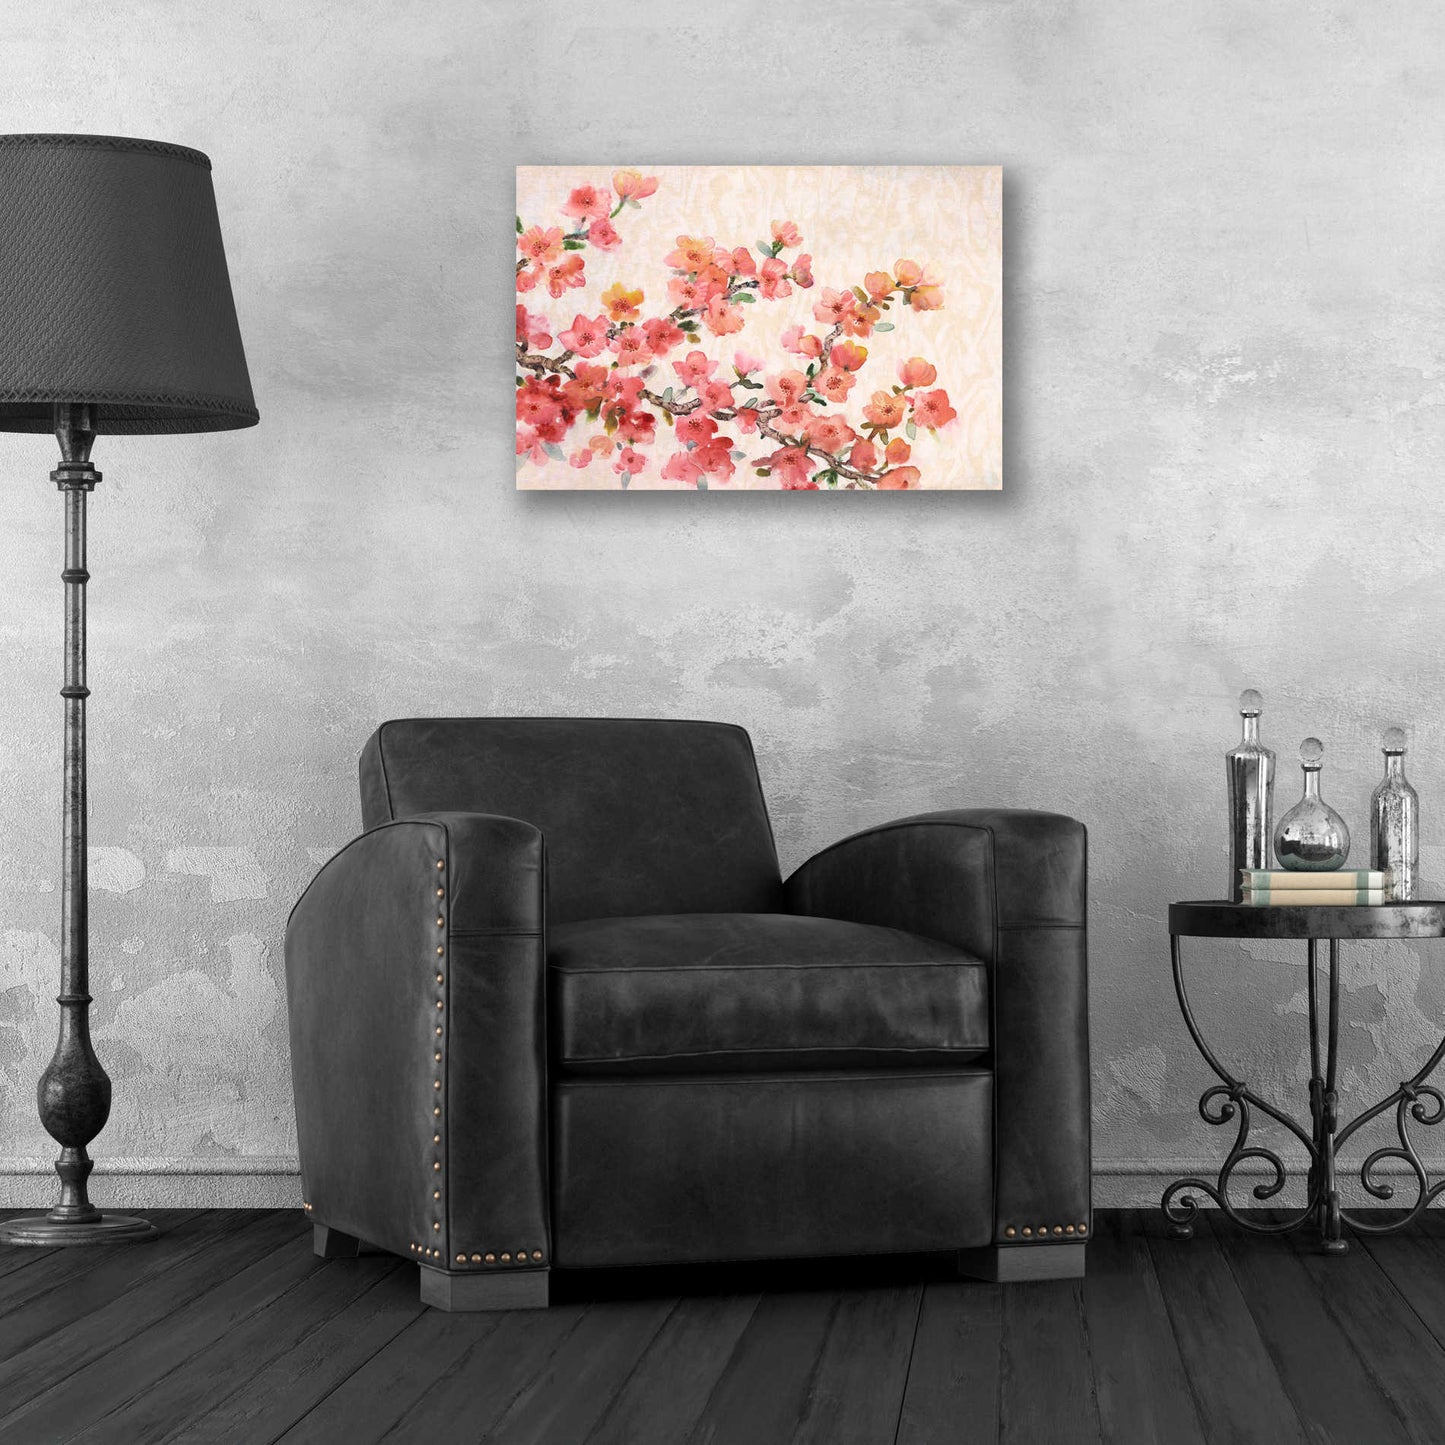 Epic Art 'Cherry Blossom Composition II' by Tim O'Toole, Acrylic Glass Wall Art,24x16